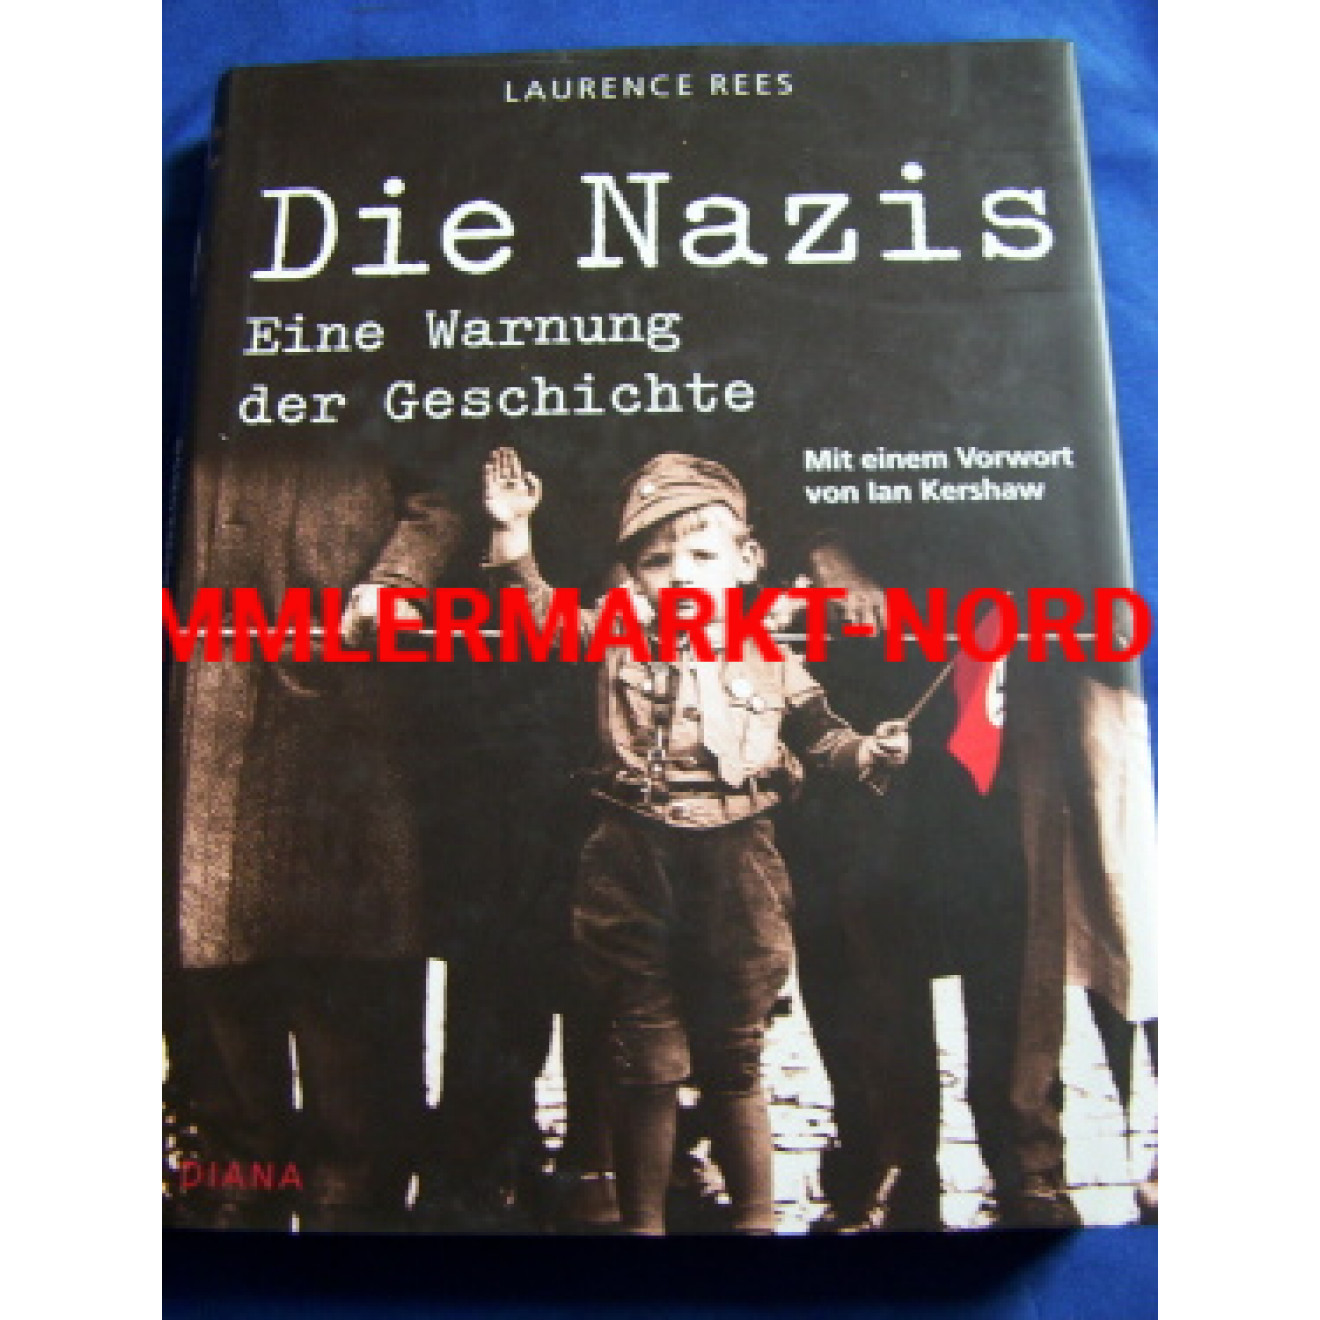 The Nazis - a warning of history